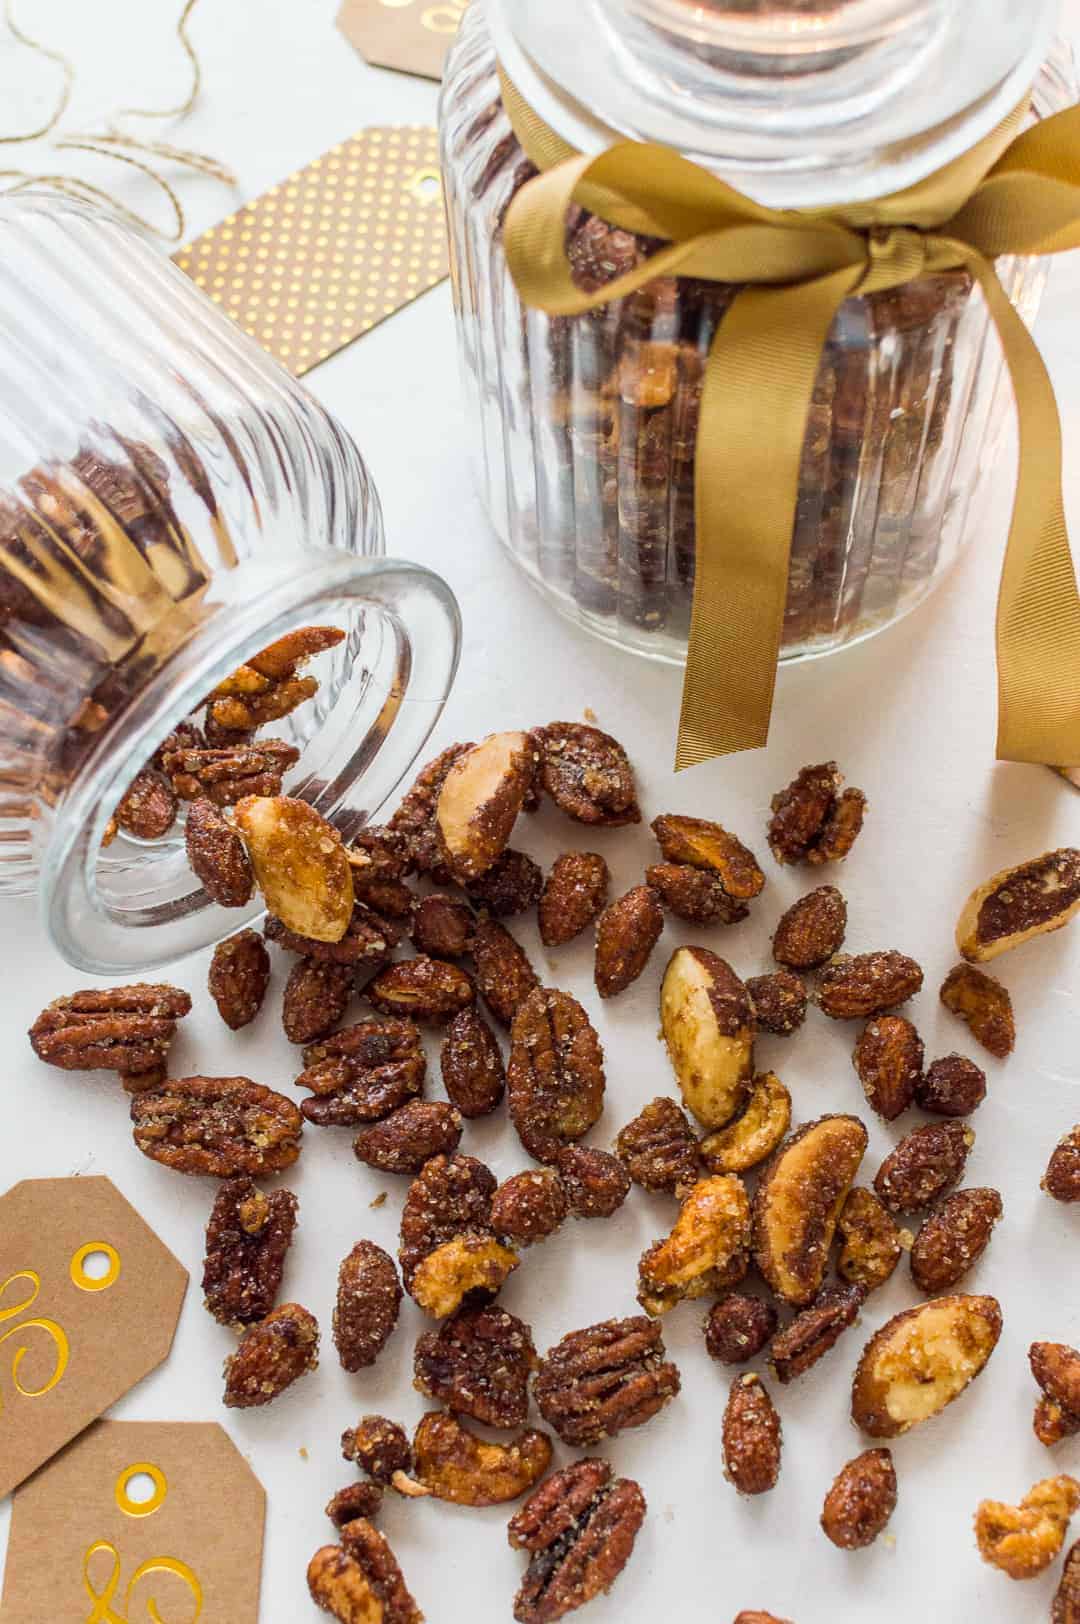 Spiced honey roasted nuts - sweet, spicy, salty and utterly addictive! They are great to snack on and would make a lovely home-made Christmas gift.